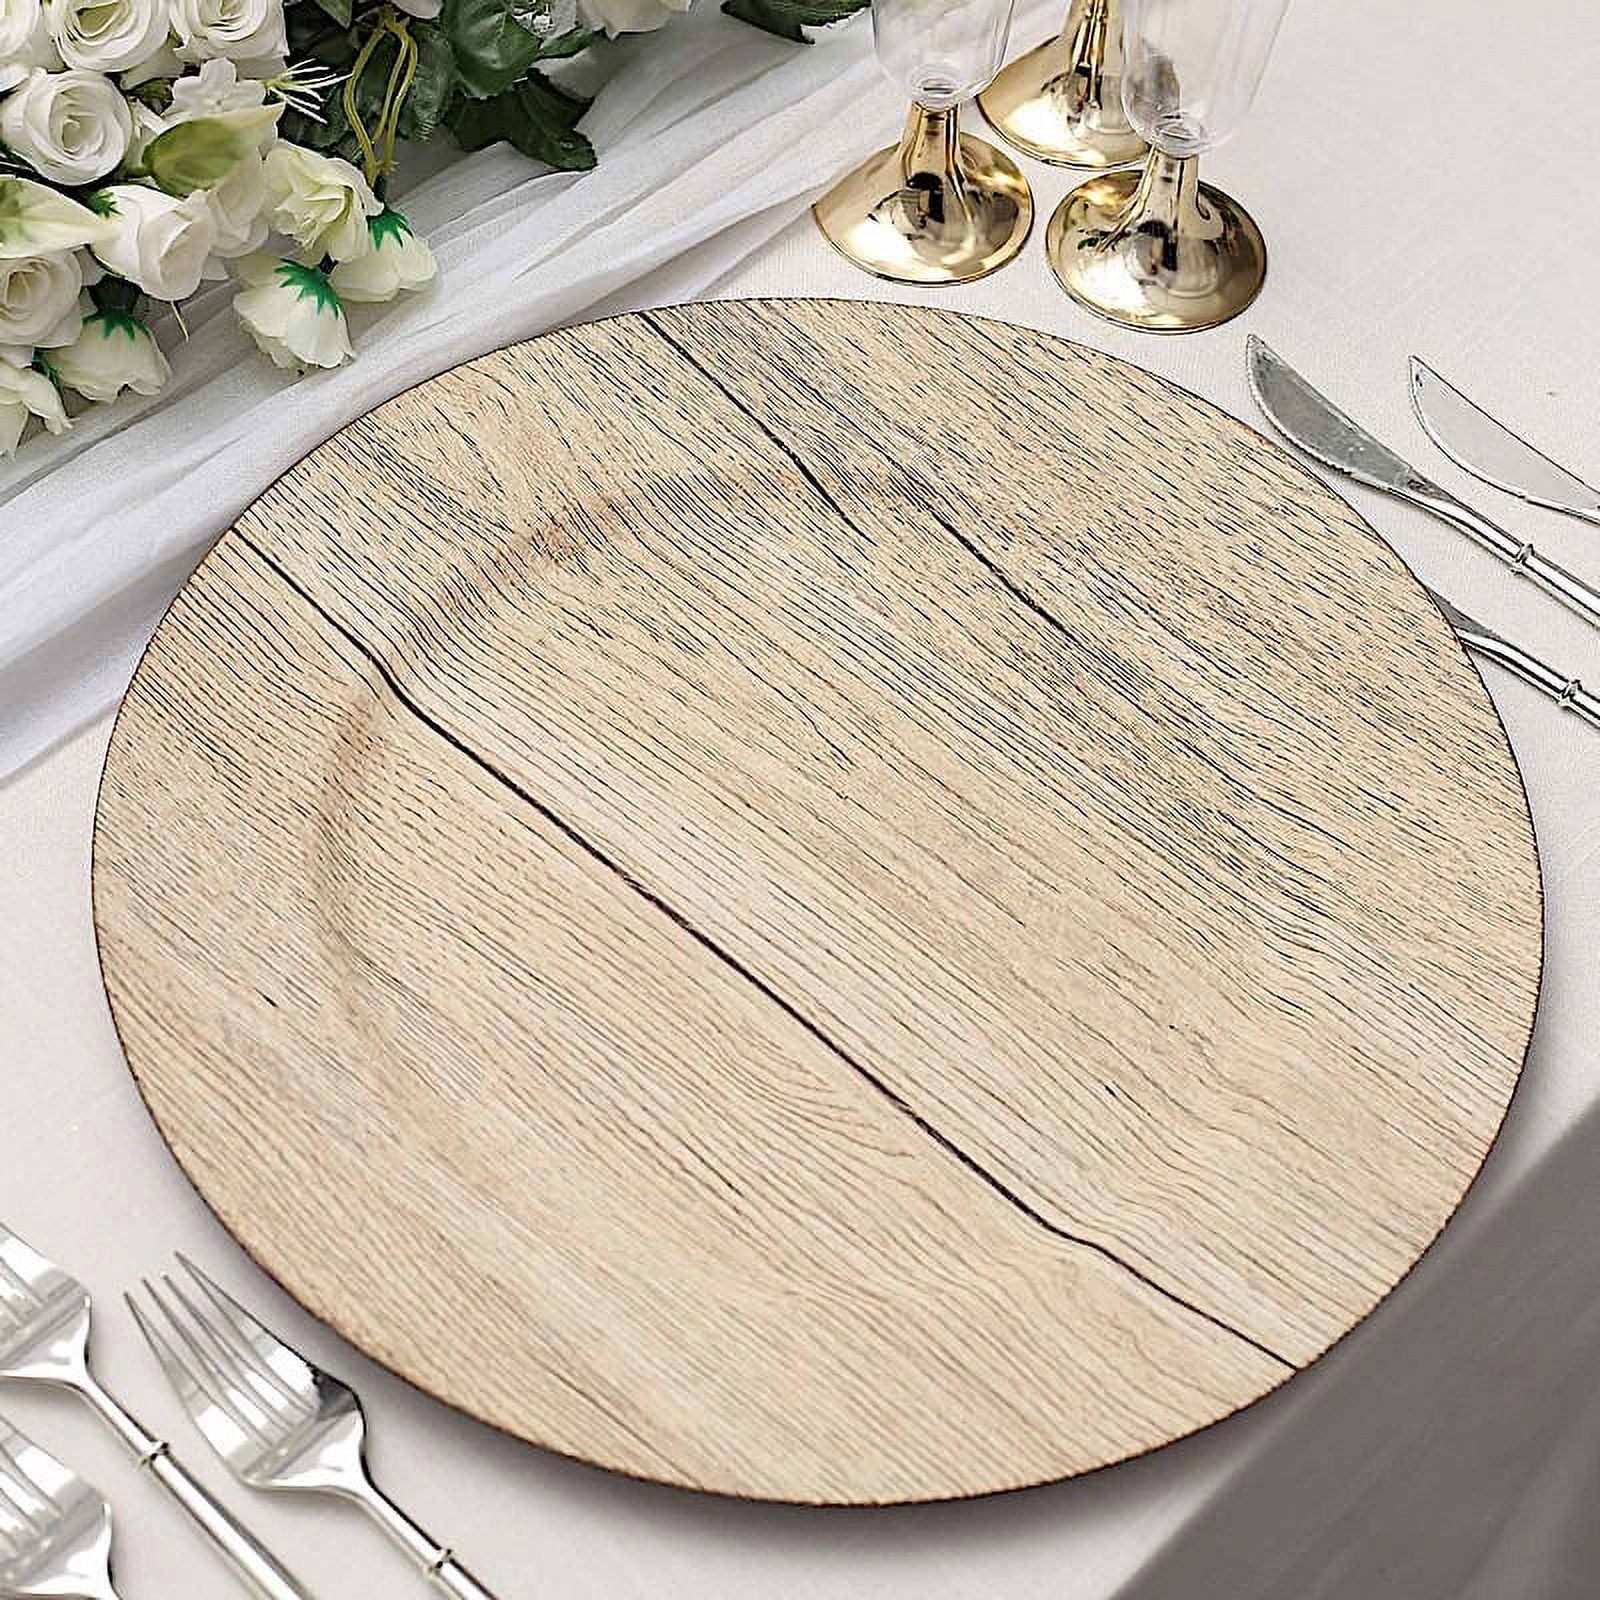 Wooden Round Lattice Charger Plate - The Crafty Decorator